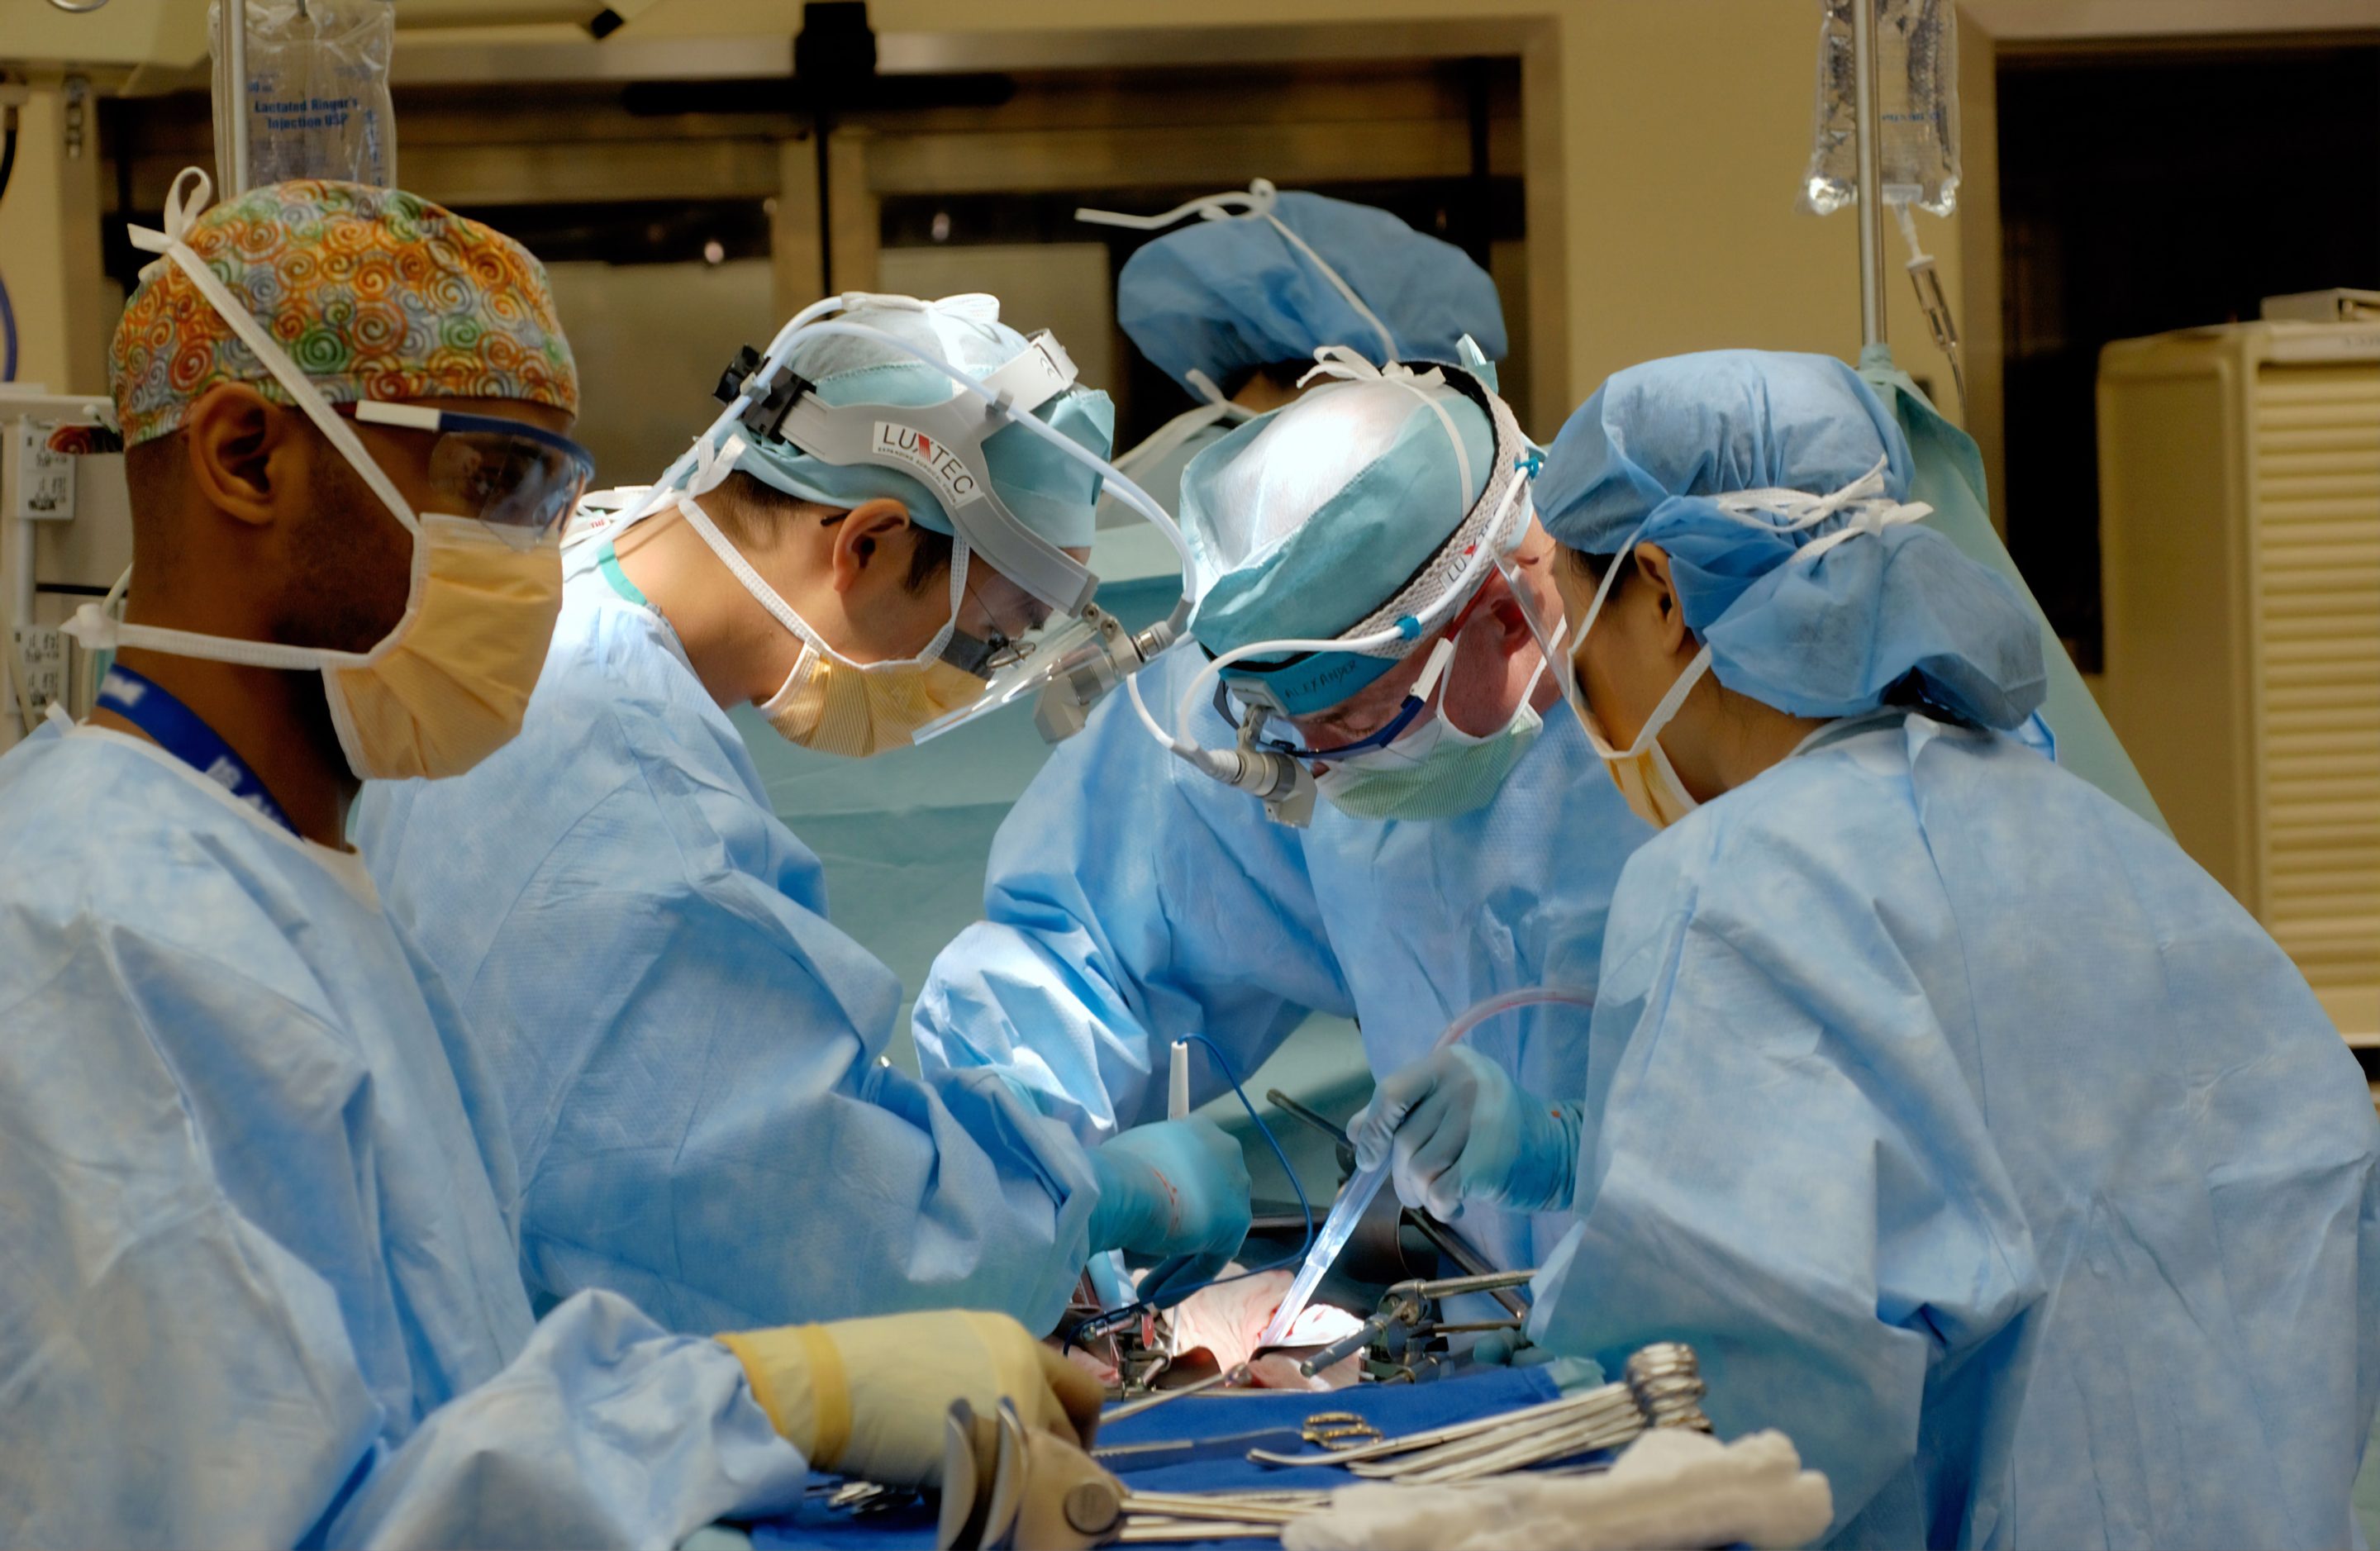 The Value of Expertise from the Operating Room to the Marketing Table